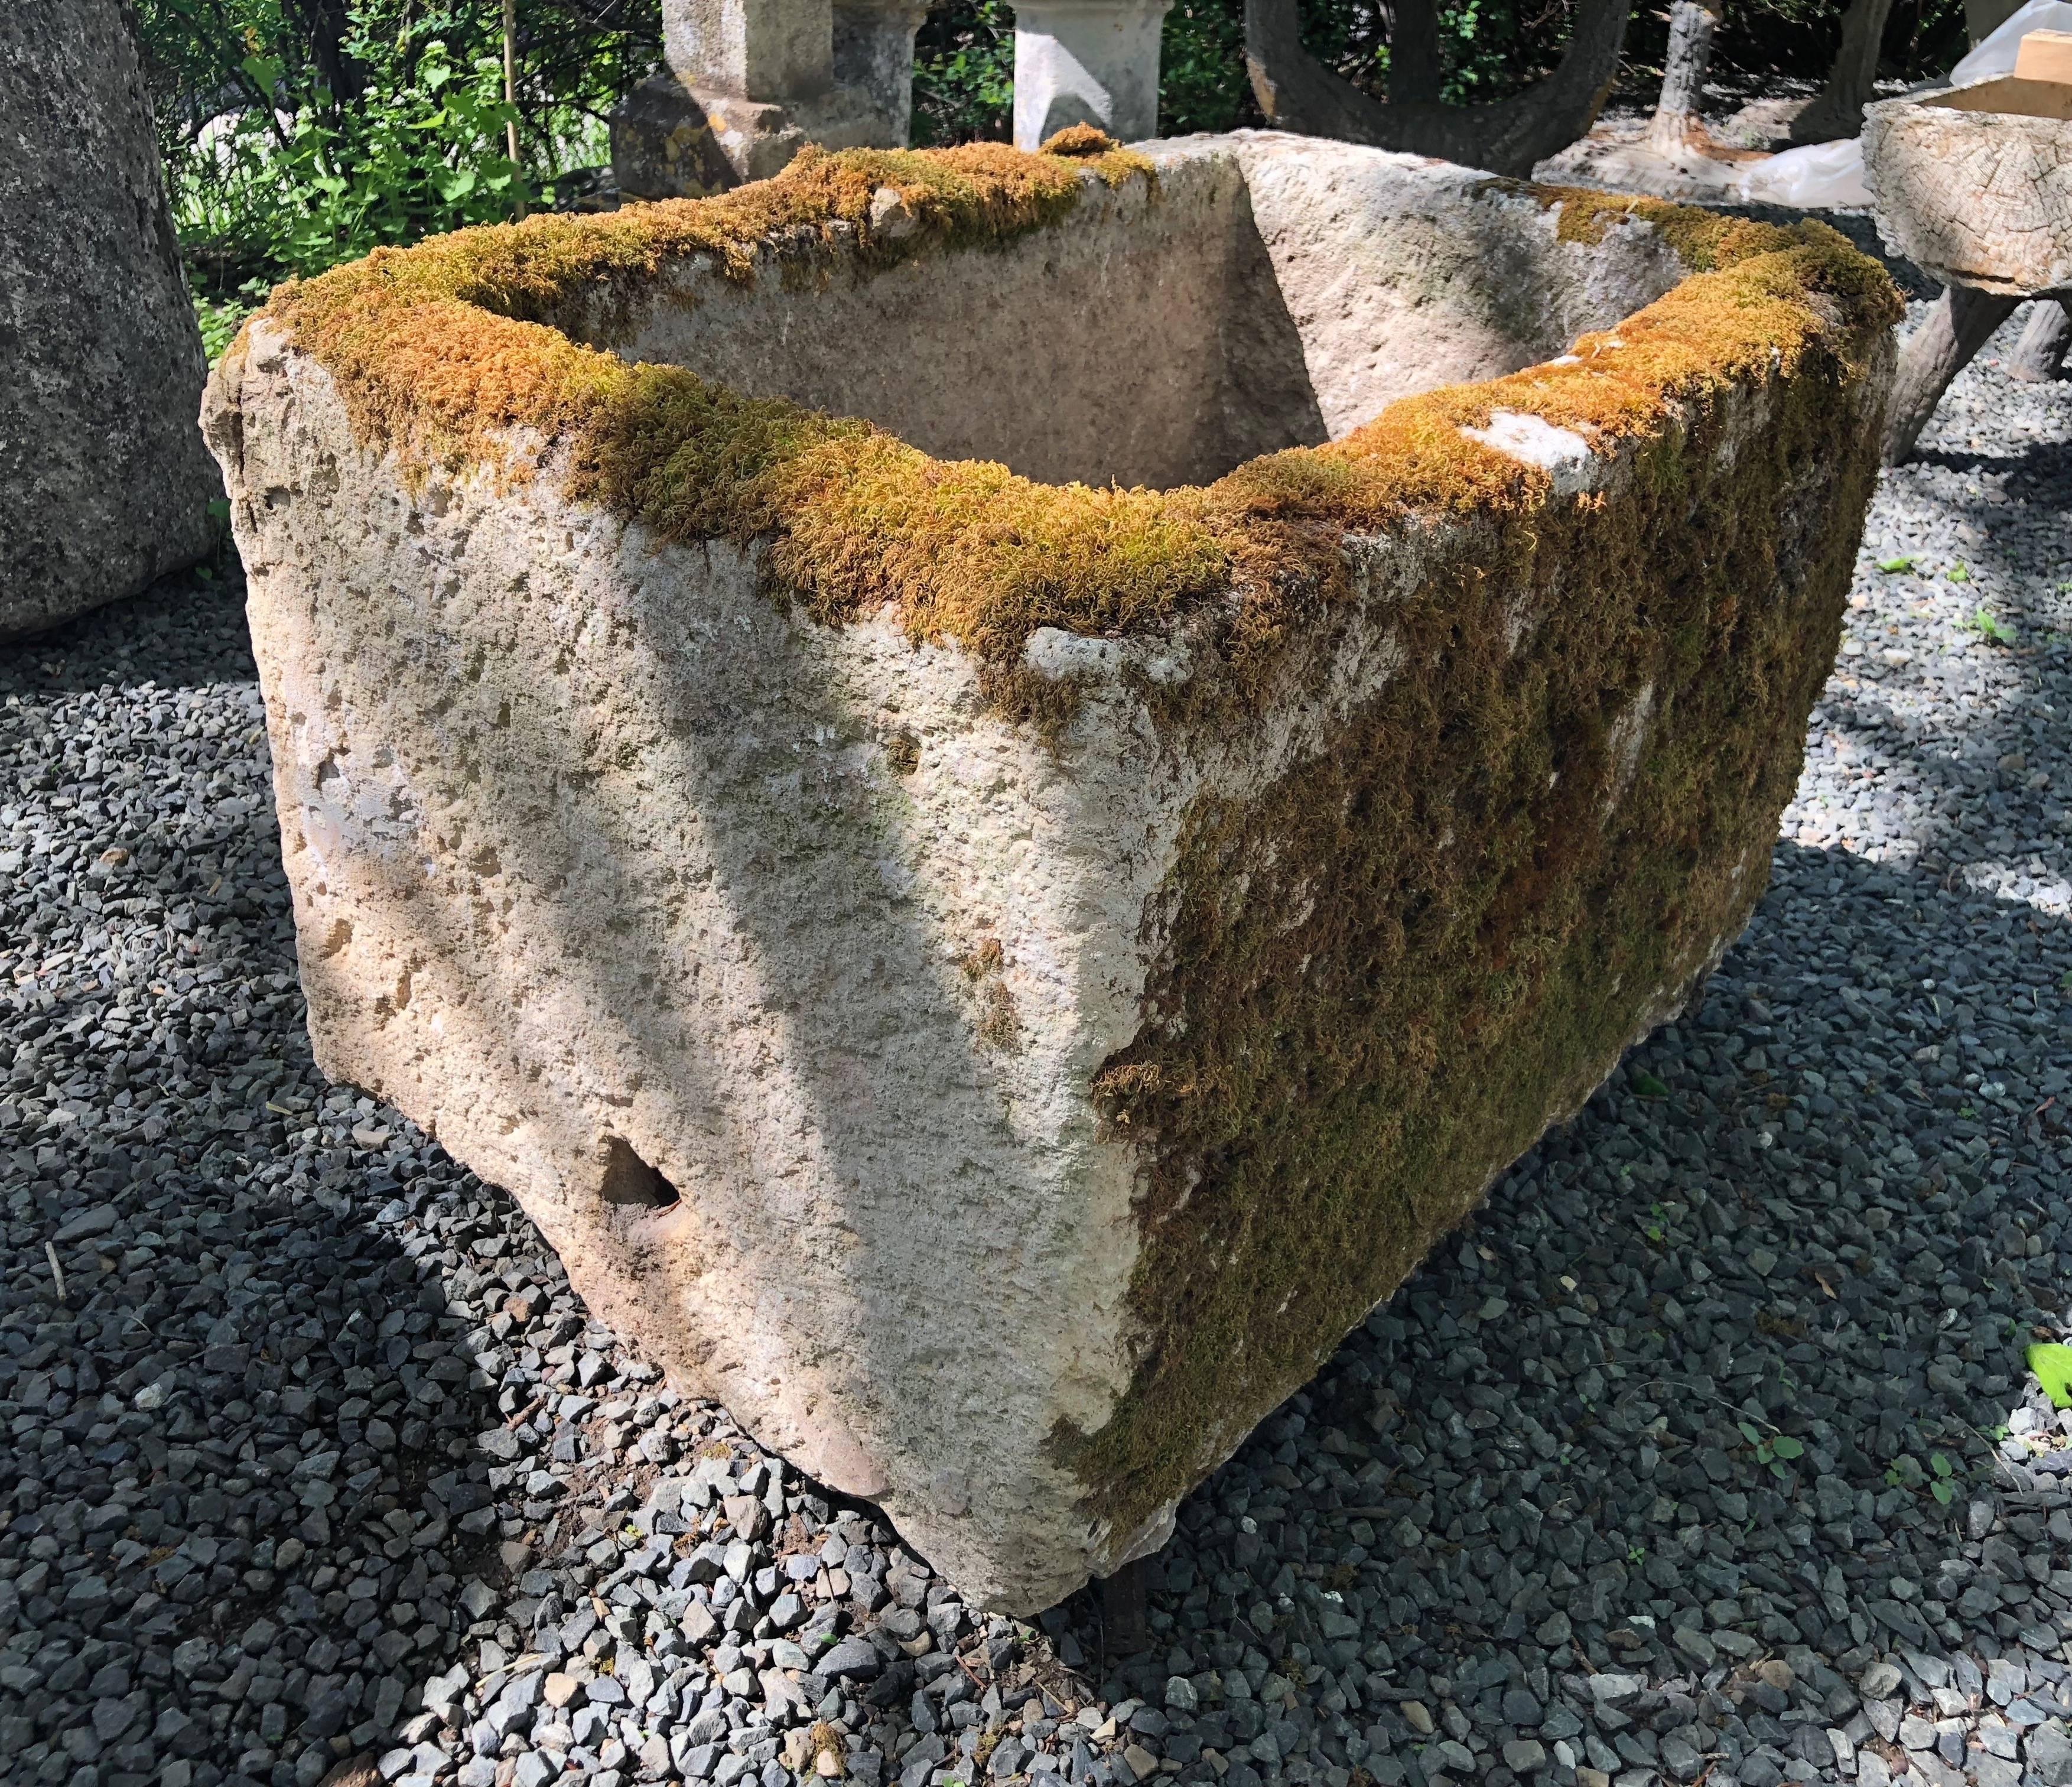 This little beauty was hand-carved from limestone at the turn of the 18th century and has the most gorgeous moss on two sides and the top rim. We are in the process of revitalizing the moss with daily soaking so it should be good and green in the